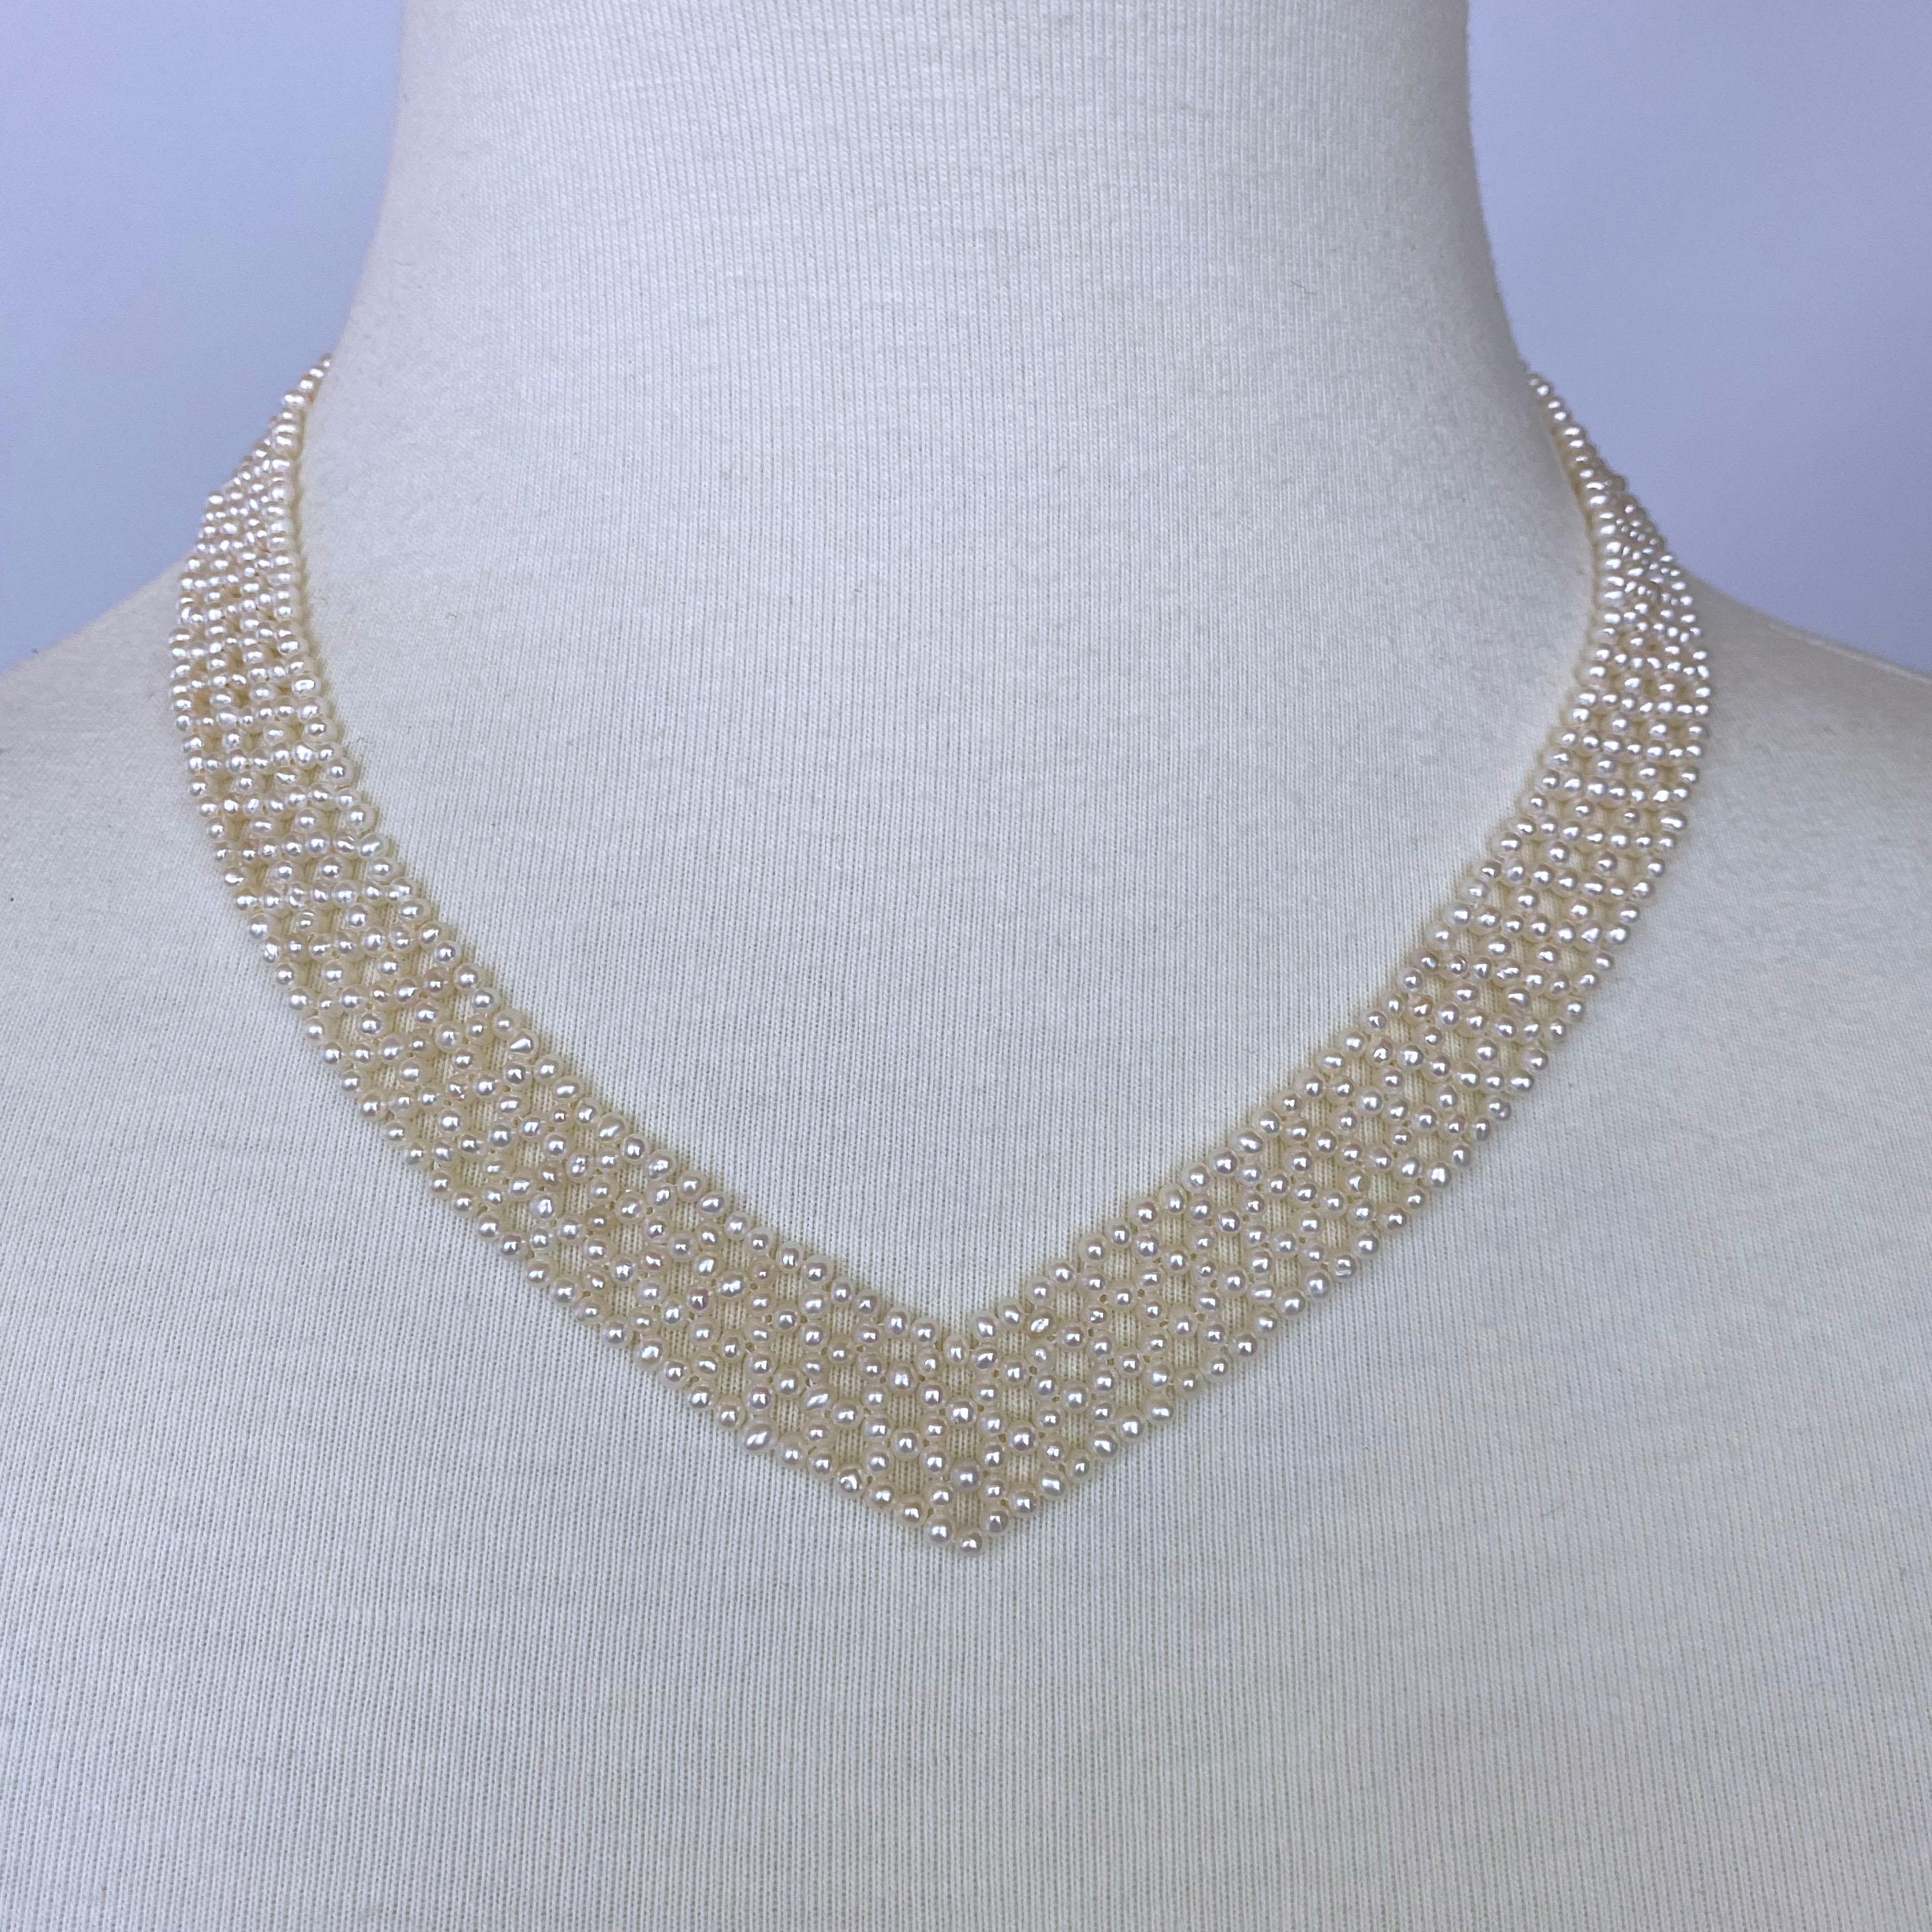 Marina J Woven 'V' Shaped Pearl Necklace with Vintage Brooch 2